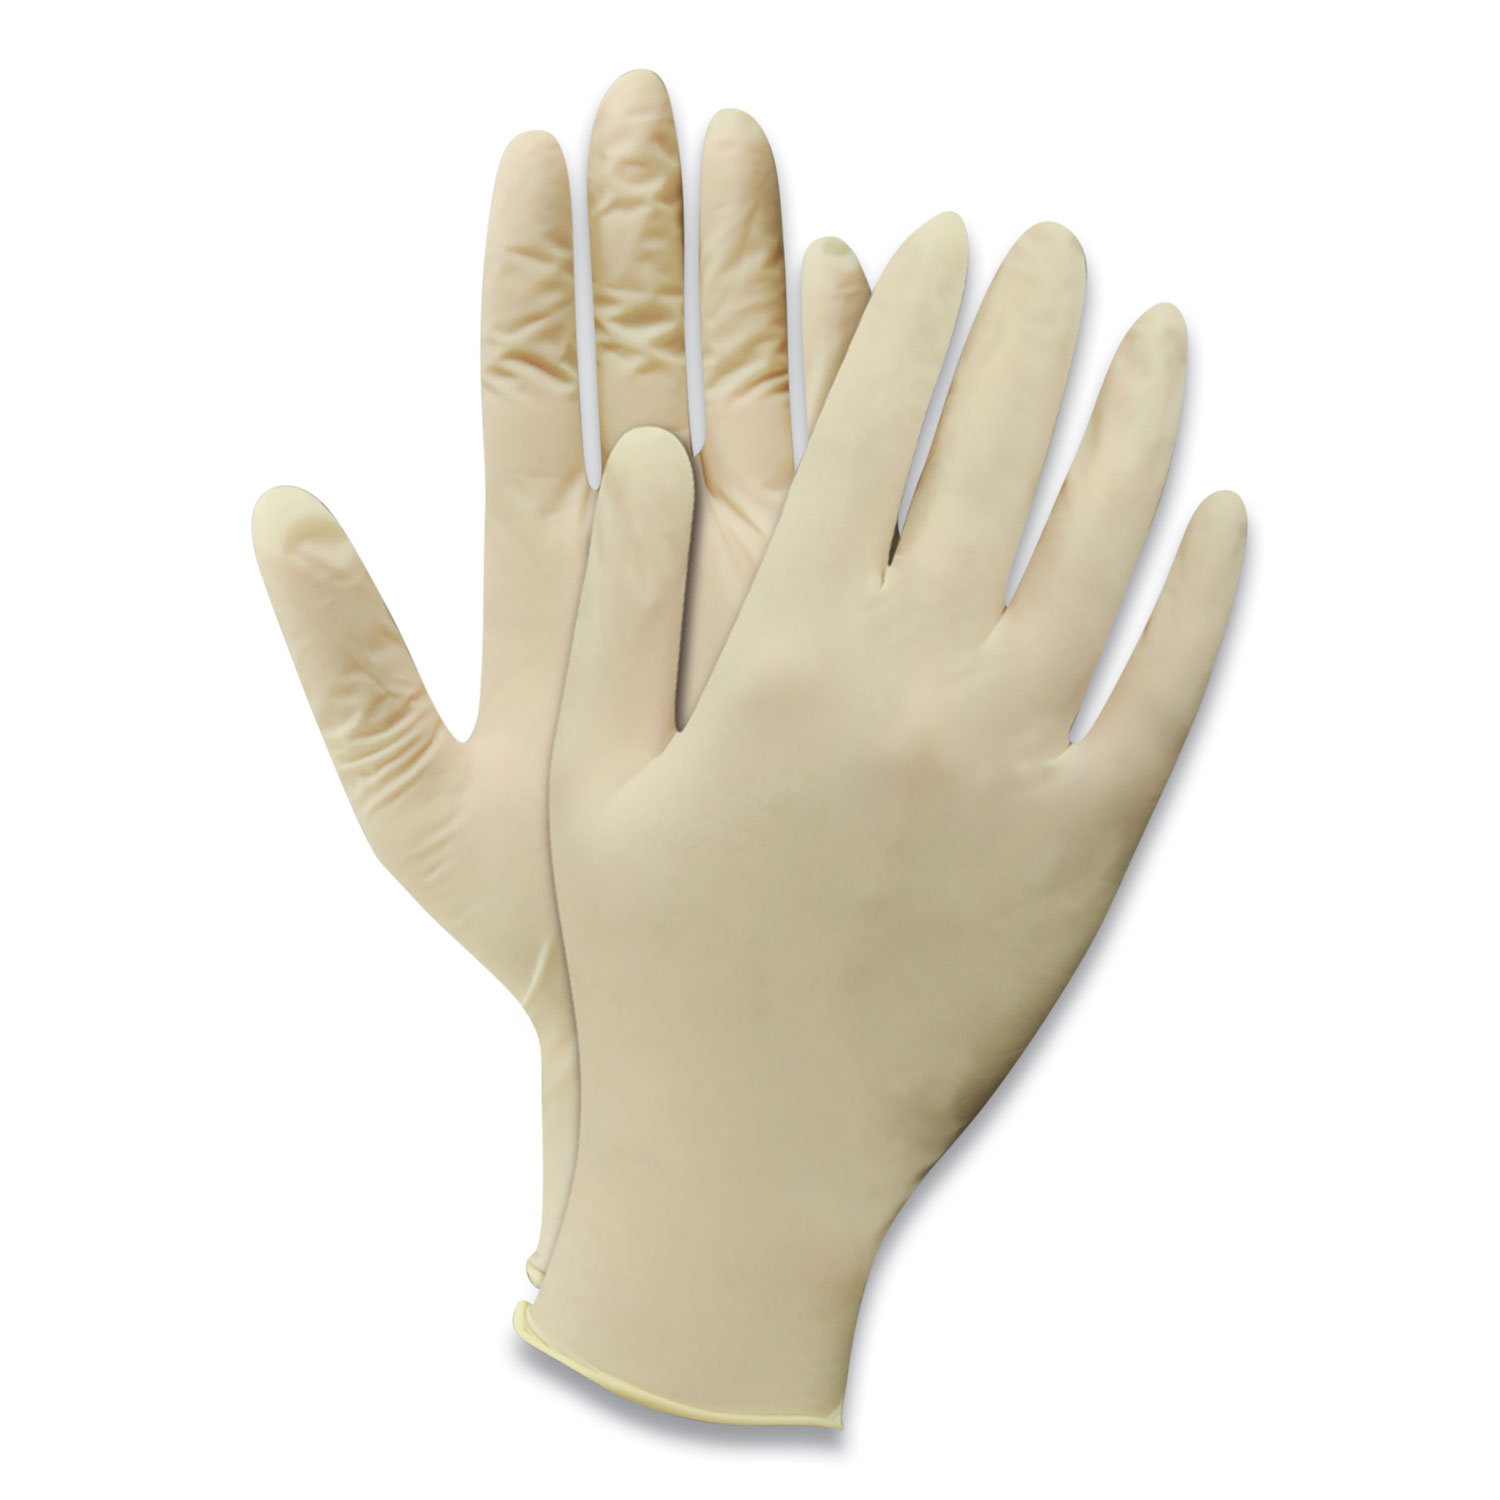  GN1 AG45100TL Disposable Powder-Free Latex Gloves, Natural White, Large, 100/Box (GN1AG45100TL) 